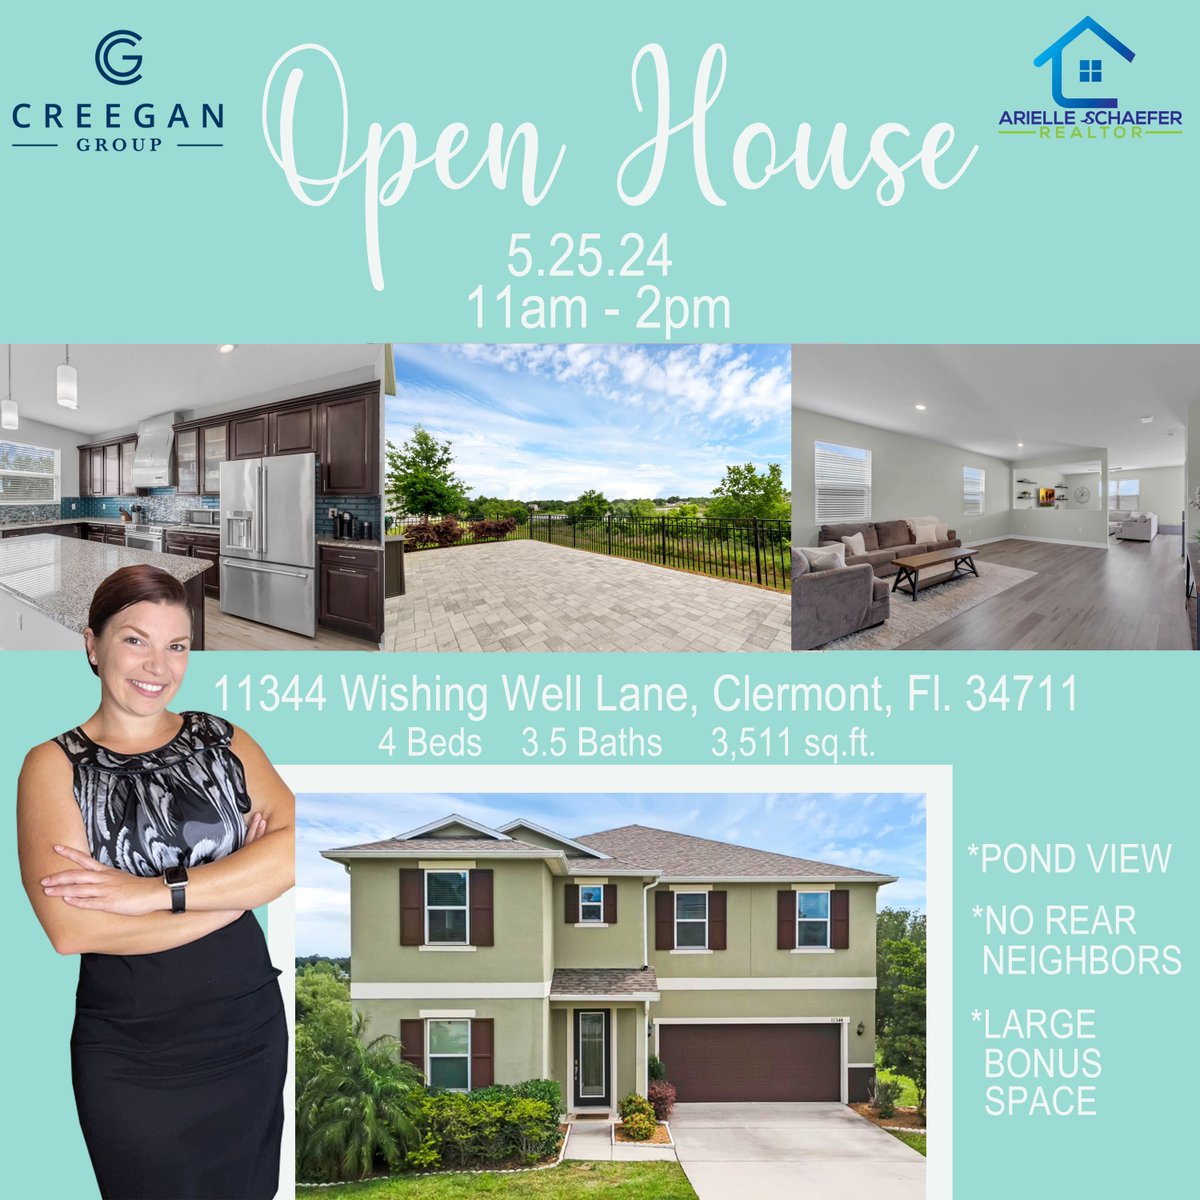 >>>STOP BY TODAY<<< Come stop by today to see this beautiful home with gorgeous pond views, no rear neighbors, a beautiful master suite on the second floor along with a large bonus space upstairs! We hope to see you all there! #Openhouse #Todayonly #Ariellesells